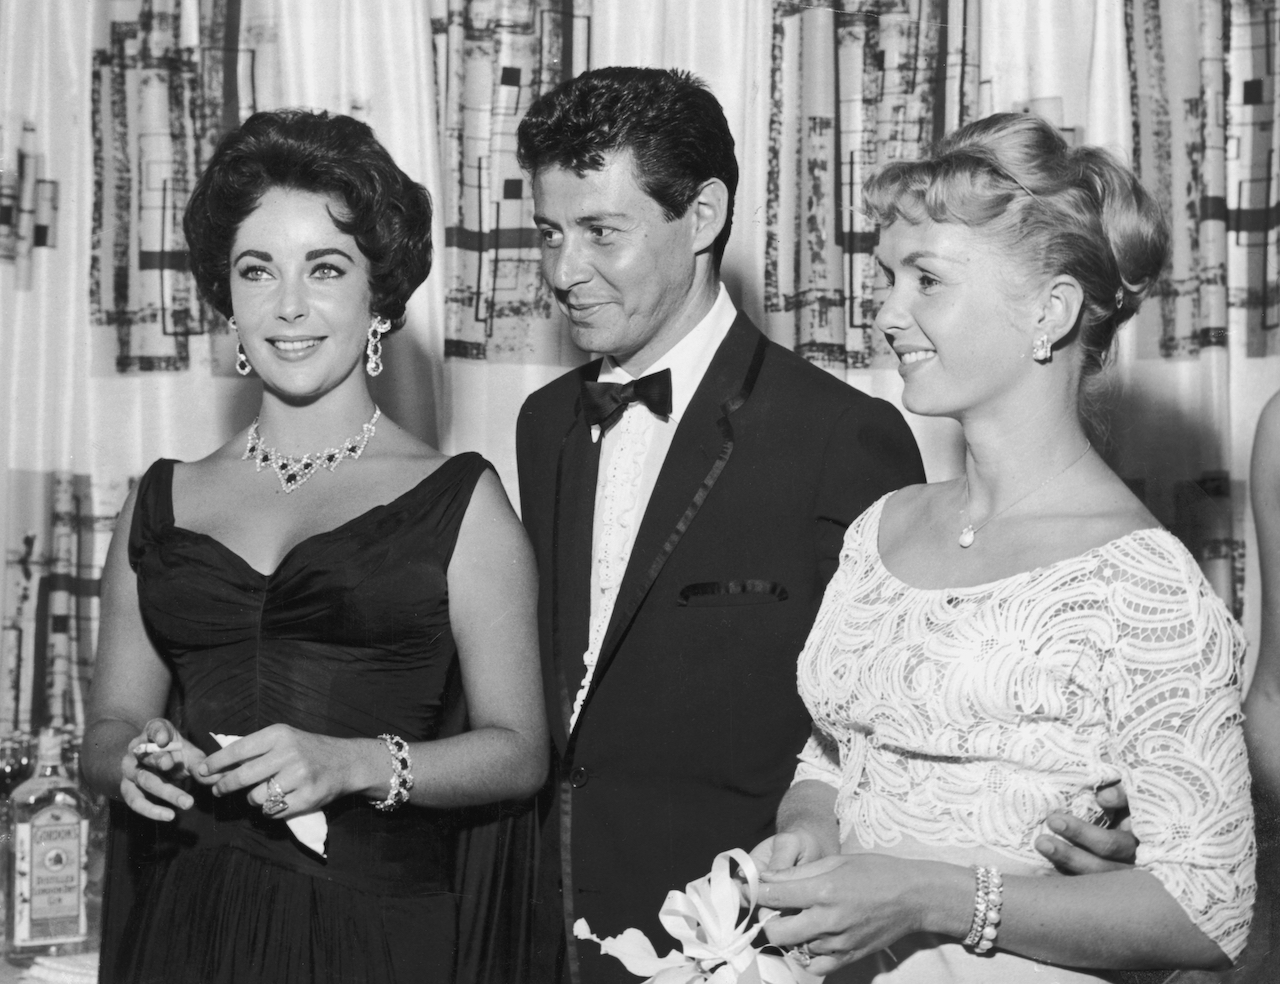 Eddie Fisher, wearing a tuxedo, stands with arm around his wife, American actor Debbie Reynolds (R) and smiles while looking at British-born actor Elizabeth Taylor, smoking a cigarette in 1958.